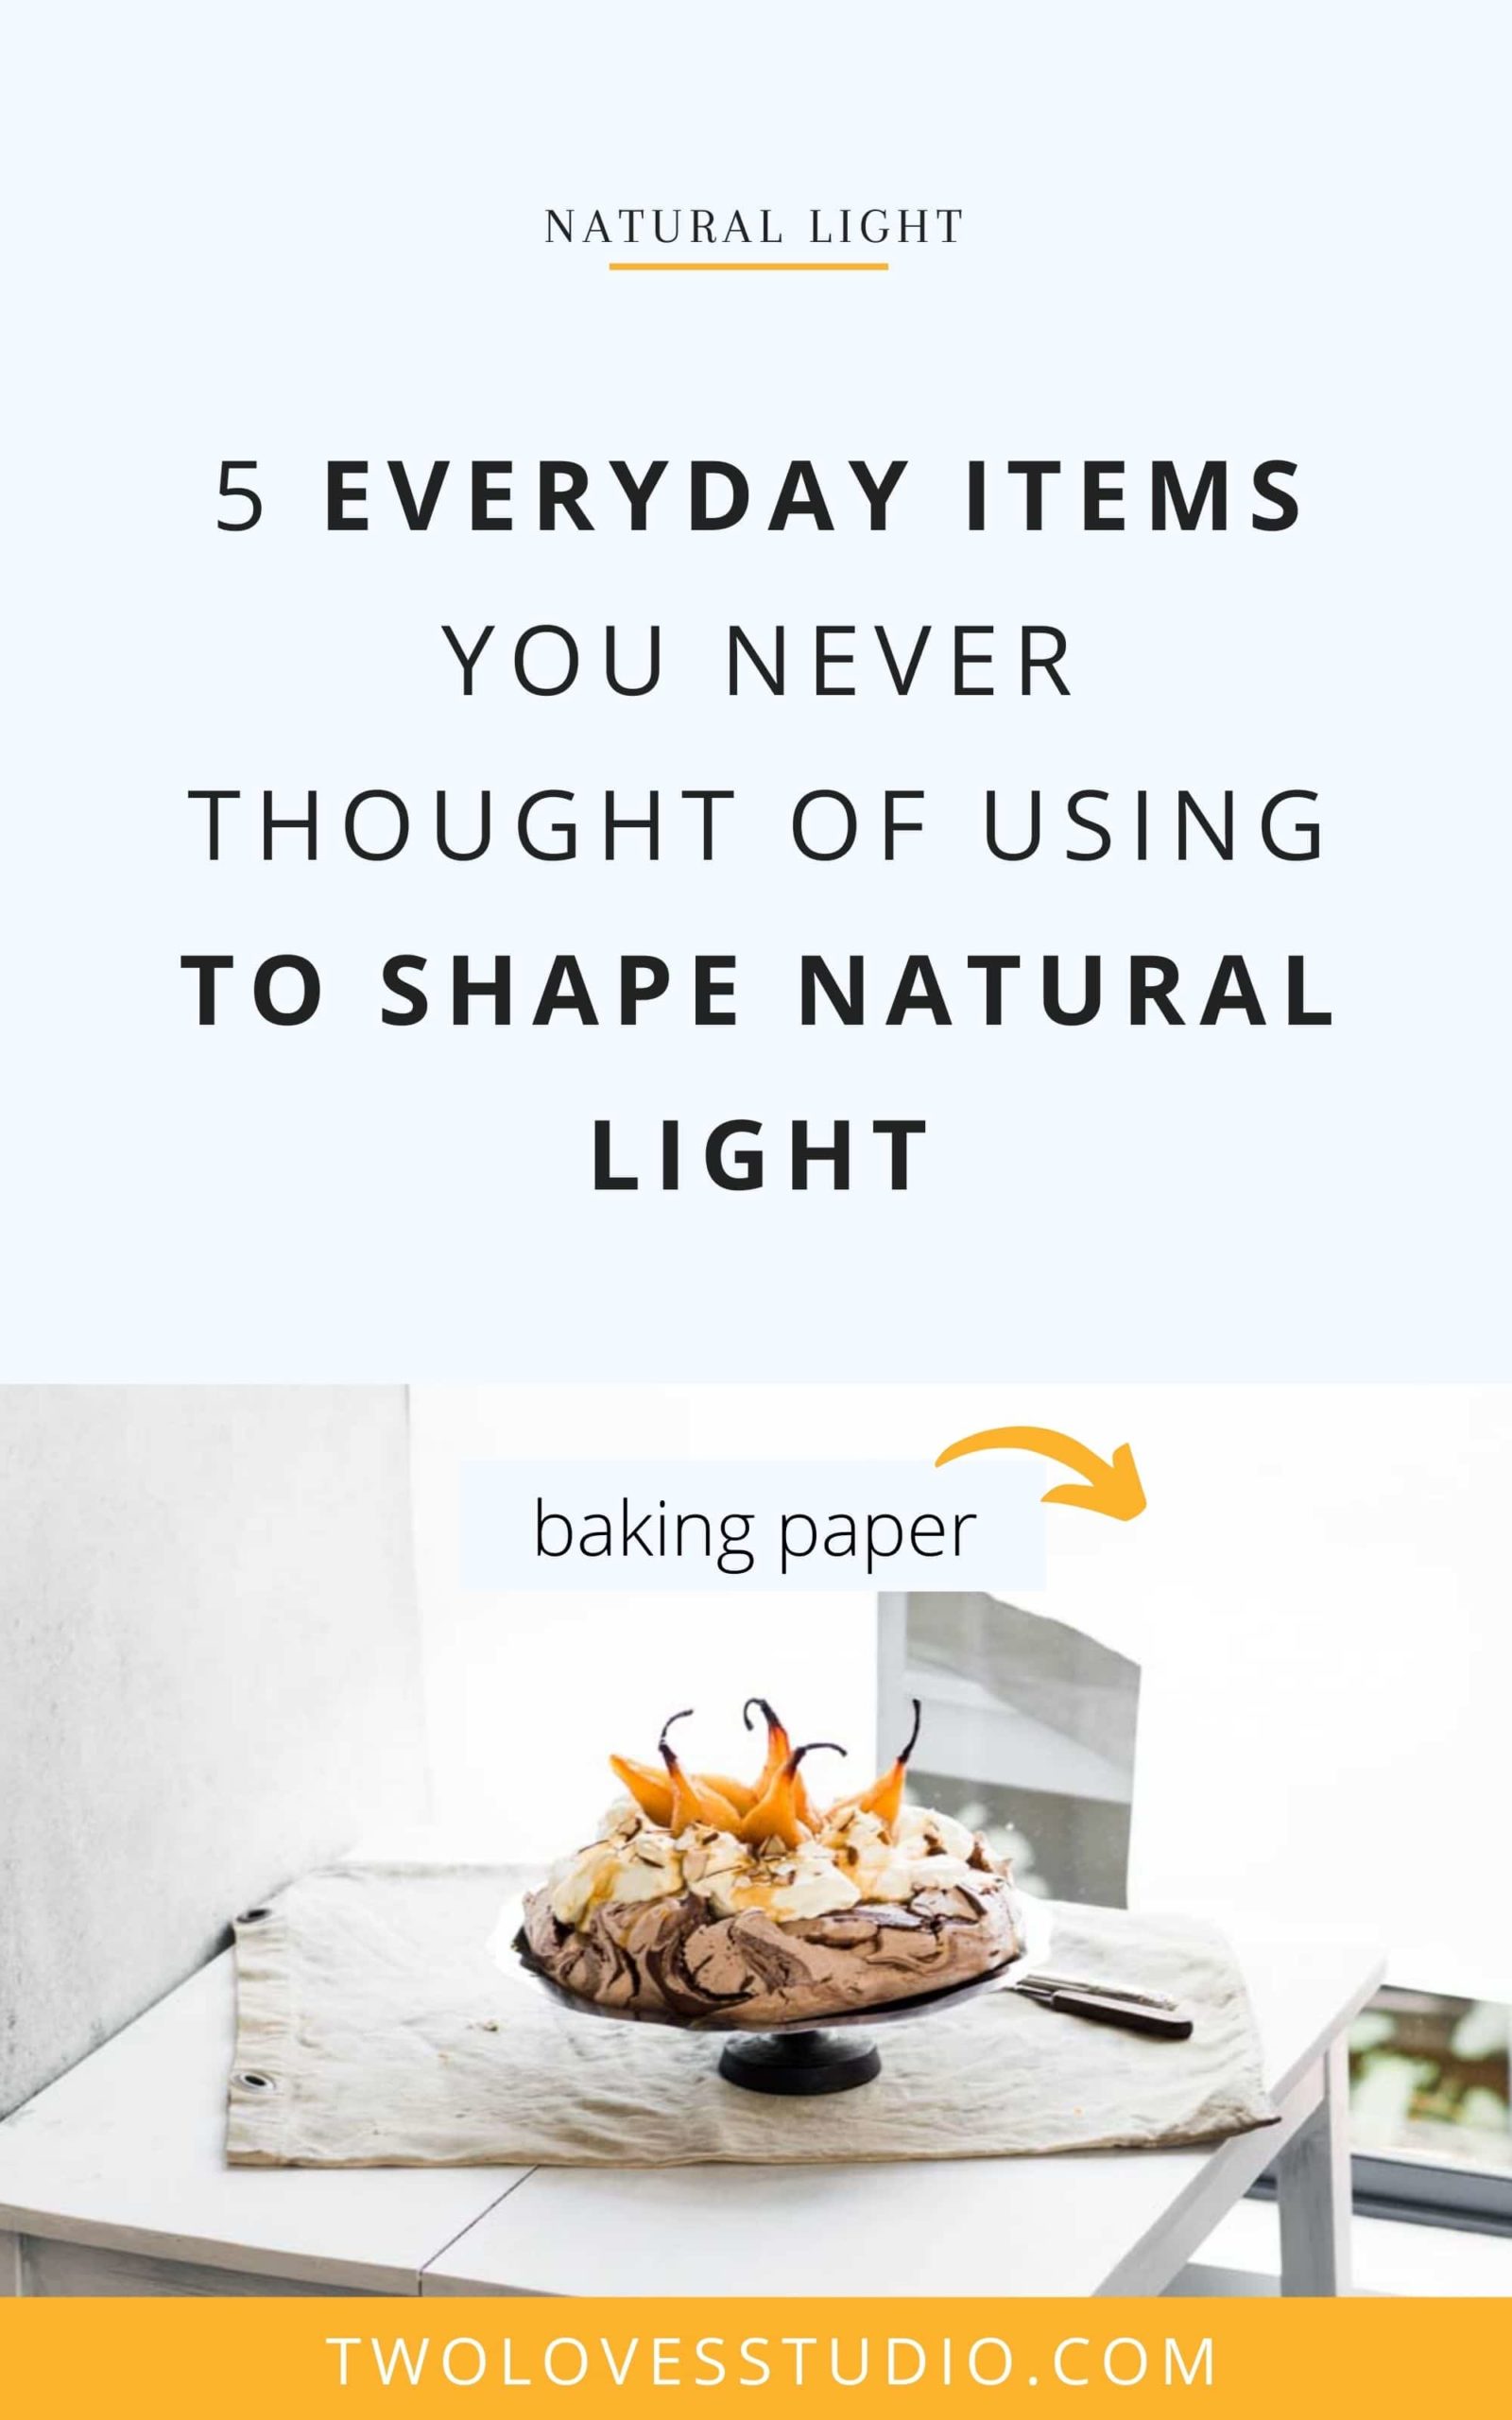 5 Everyday Items You Never Thought of Using to Shape Natural Light